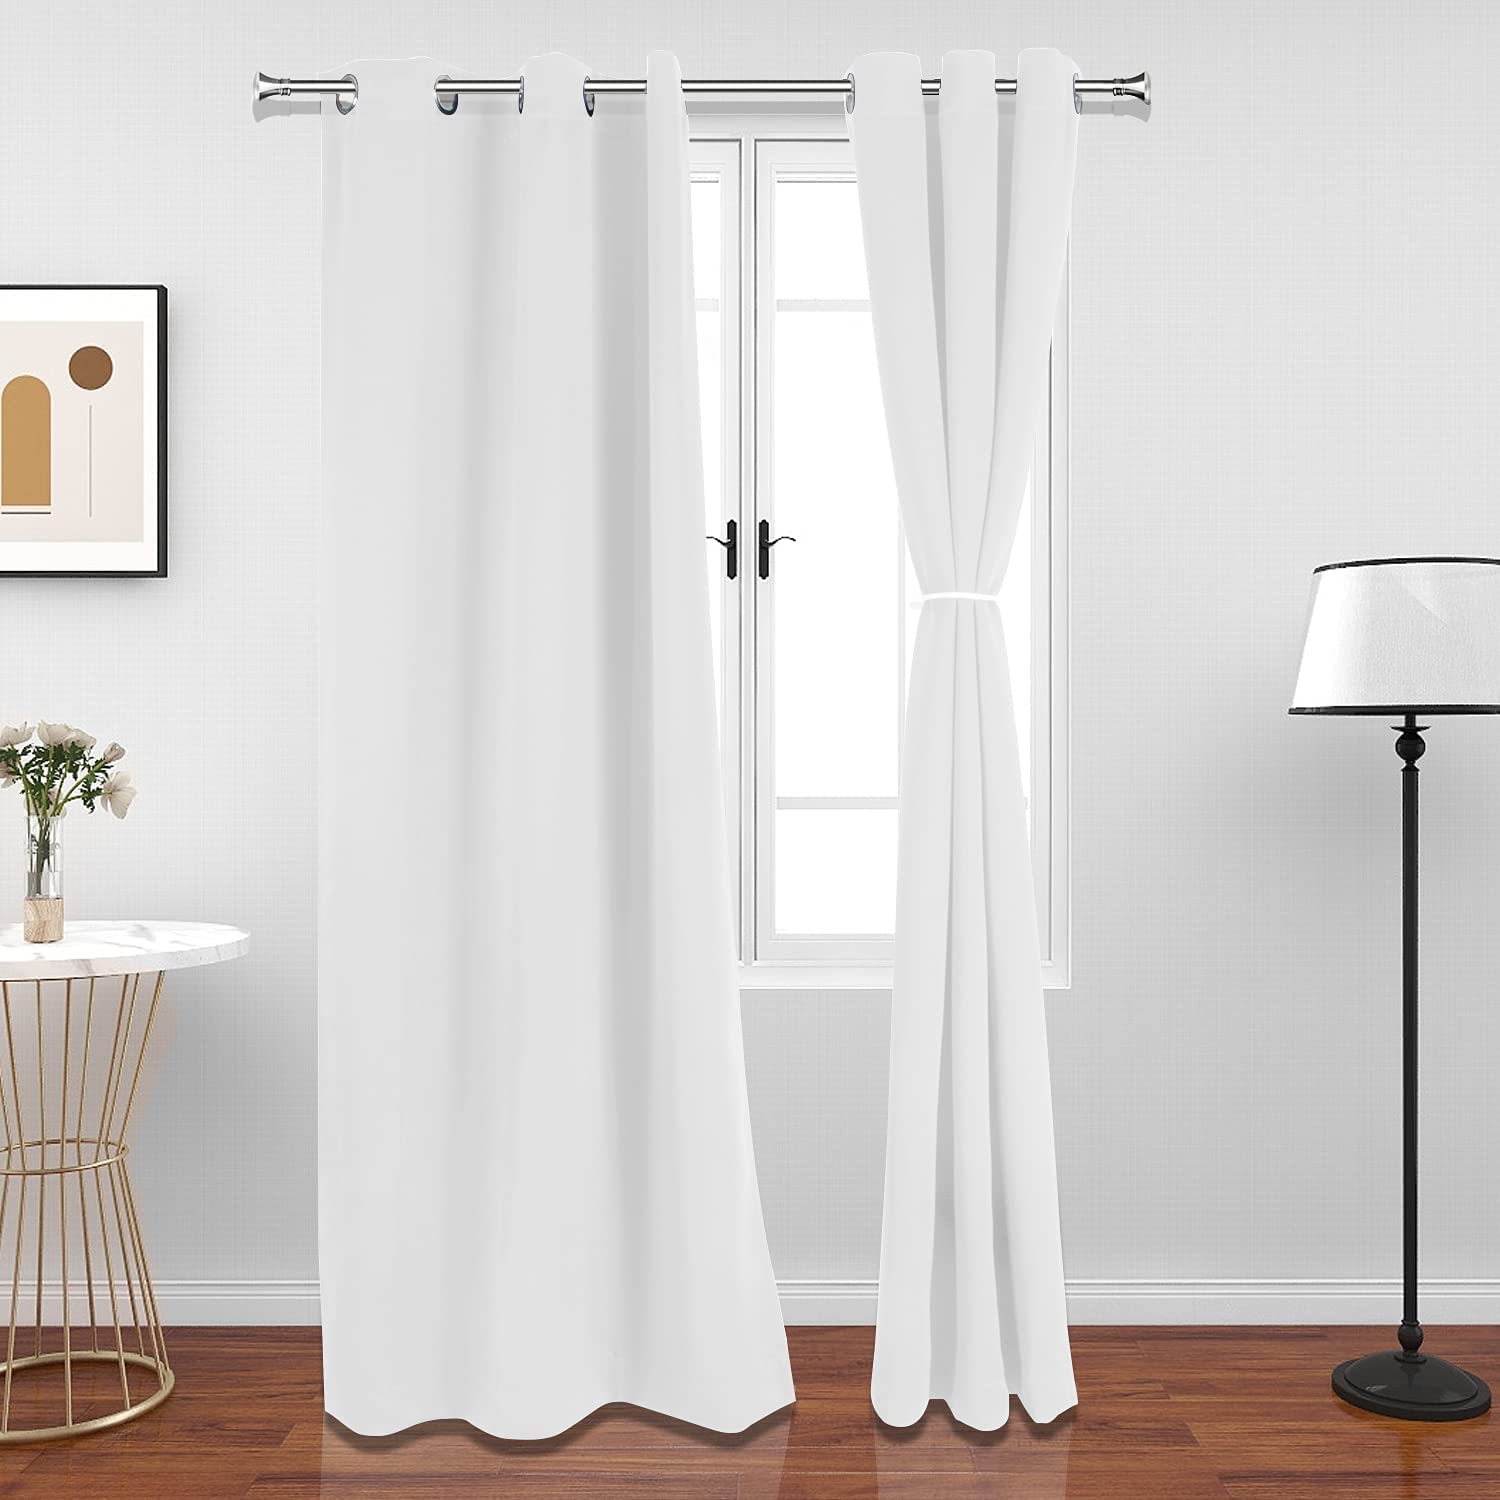 NUTRO CHILL White Curtains Noise Reducing Curtains